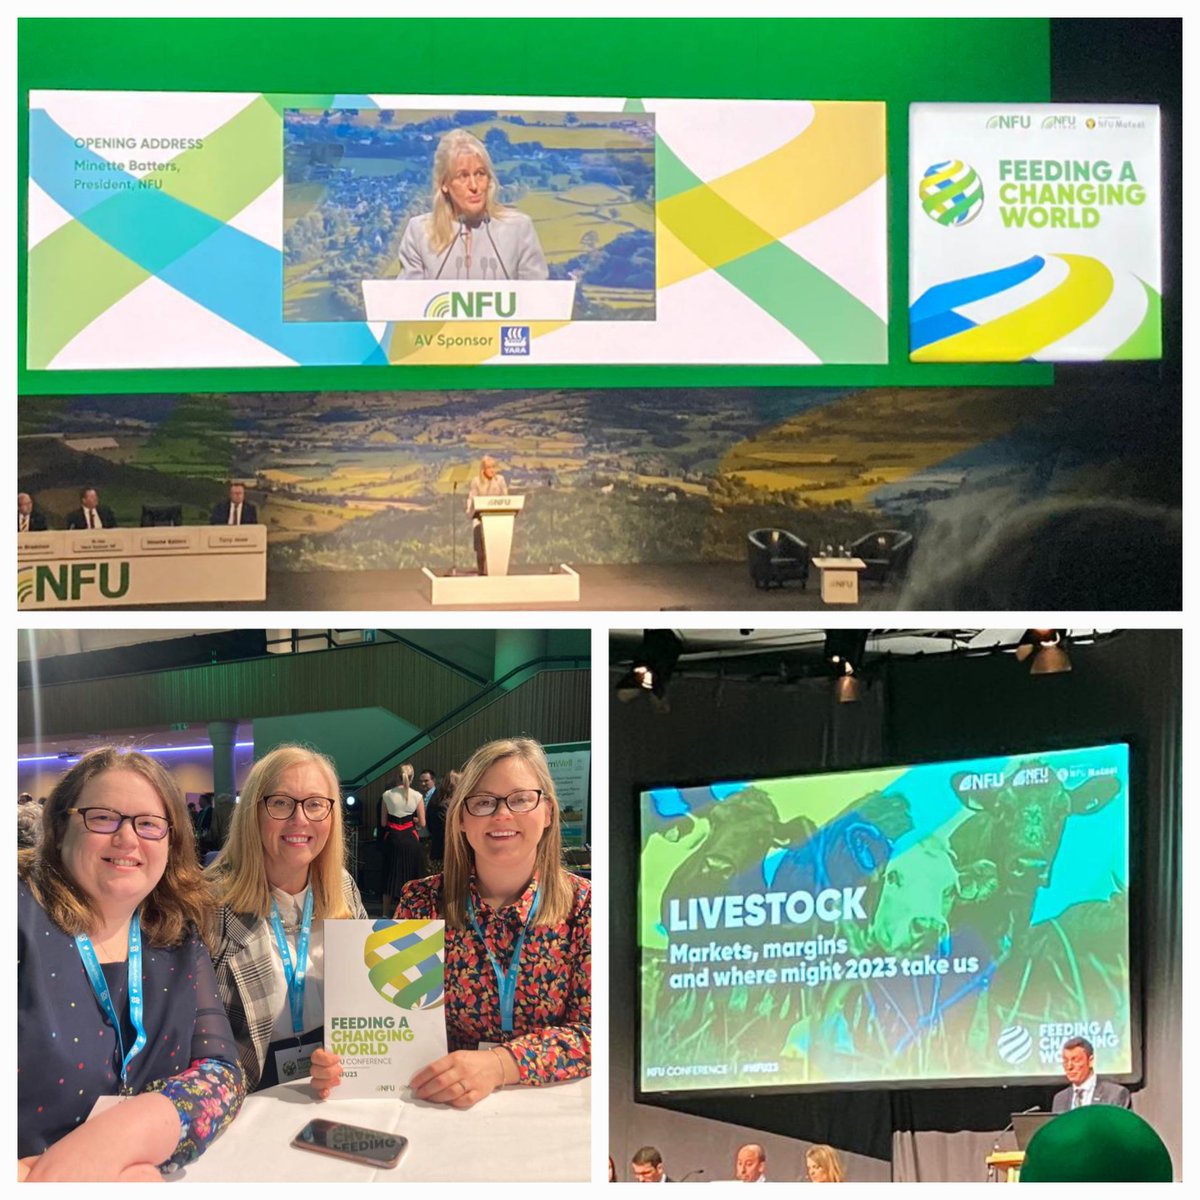 Nerys and Alison have had a very informative two days at the NFU Conference 23 - Feeding a Changing World 🐑🌾🐷🤝🐮 #nfu23 #feedingthenation @NFUCymru